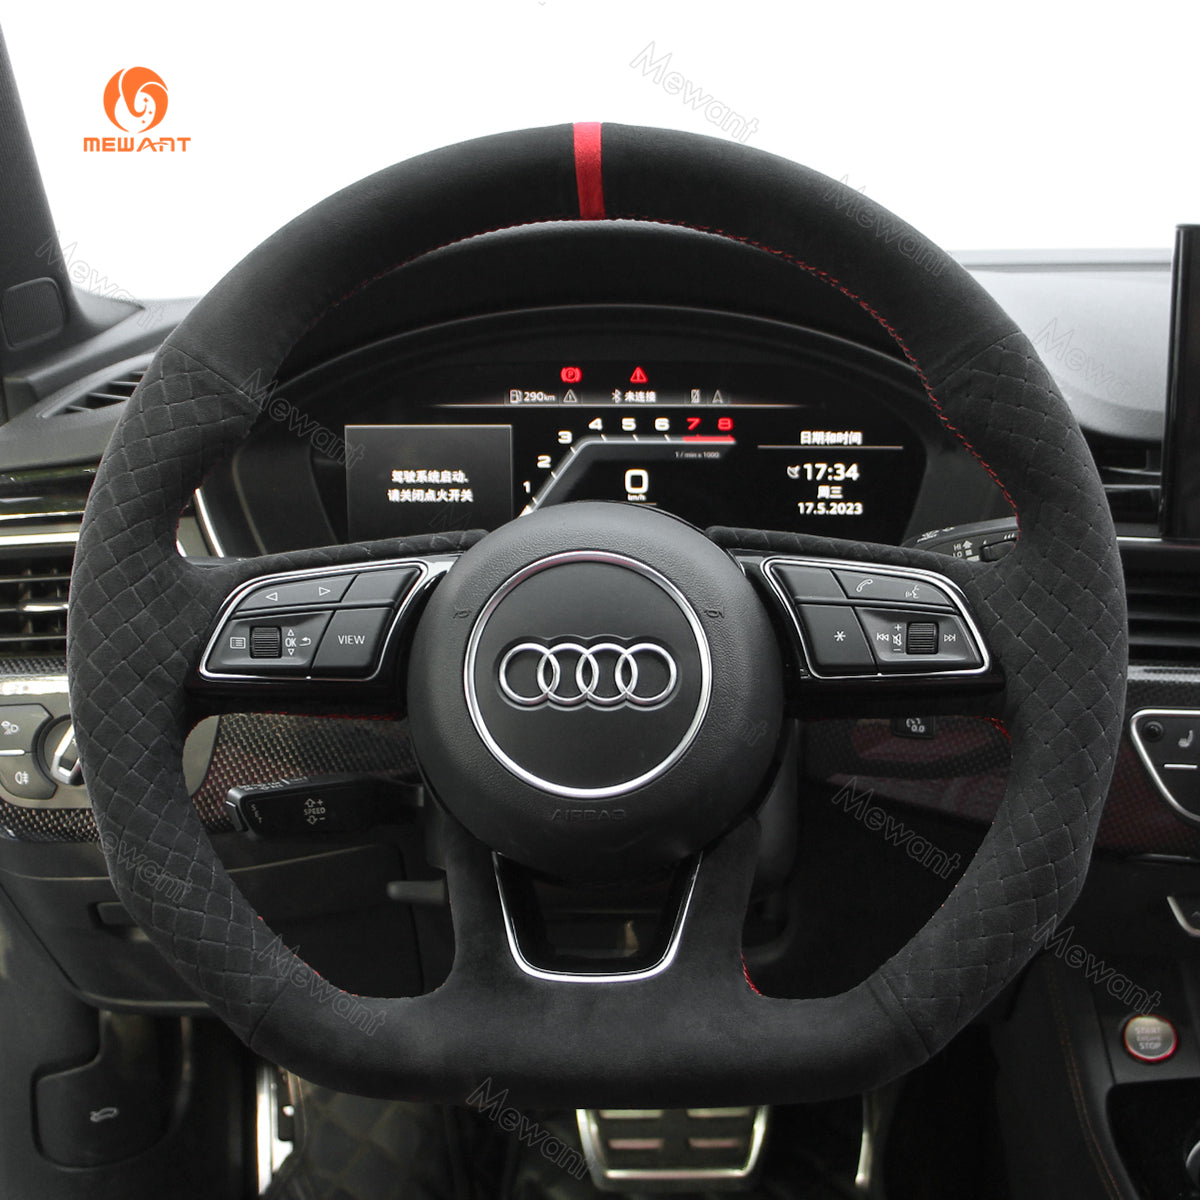 MEWANT Alcantara Embossing Style Car Steering Wheel Cover for Audi with Quilted and Hive Pattern